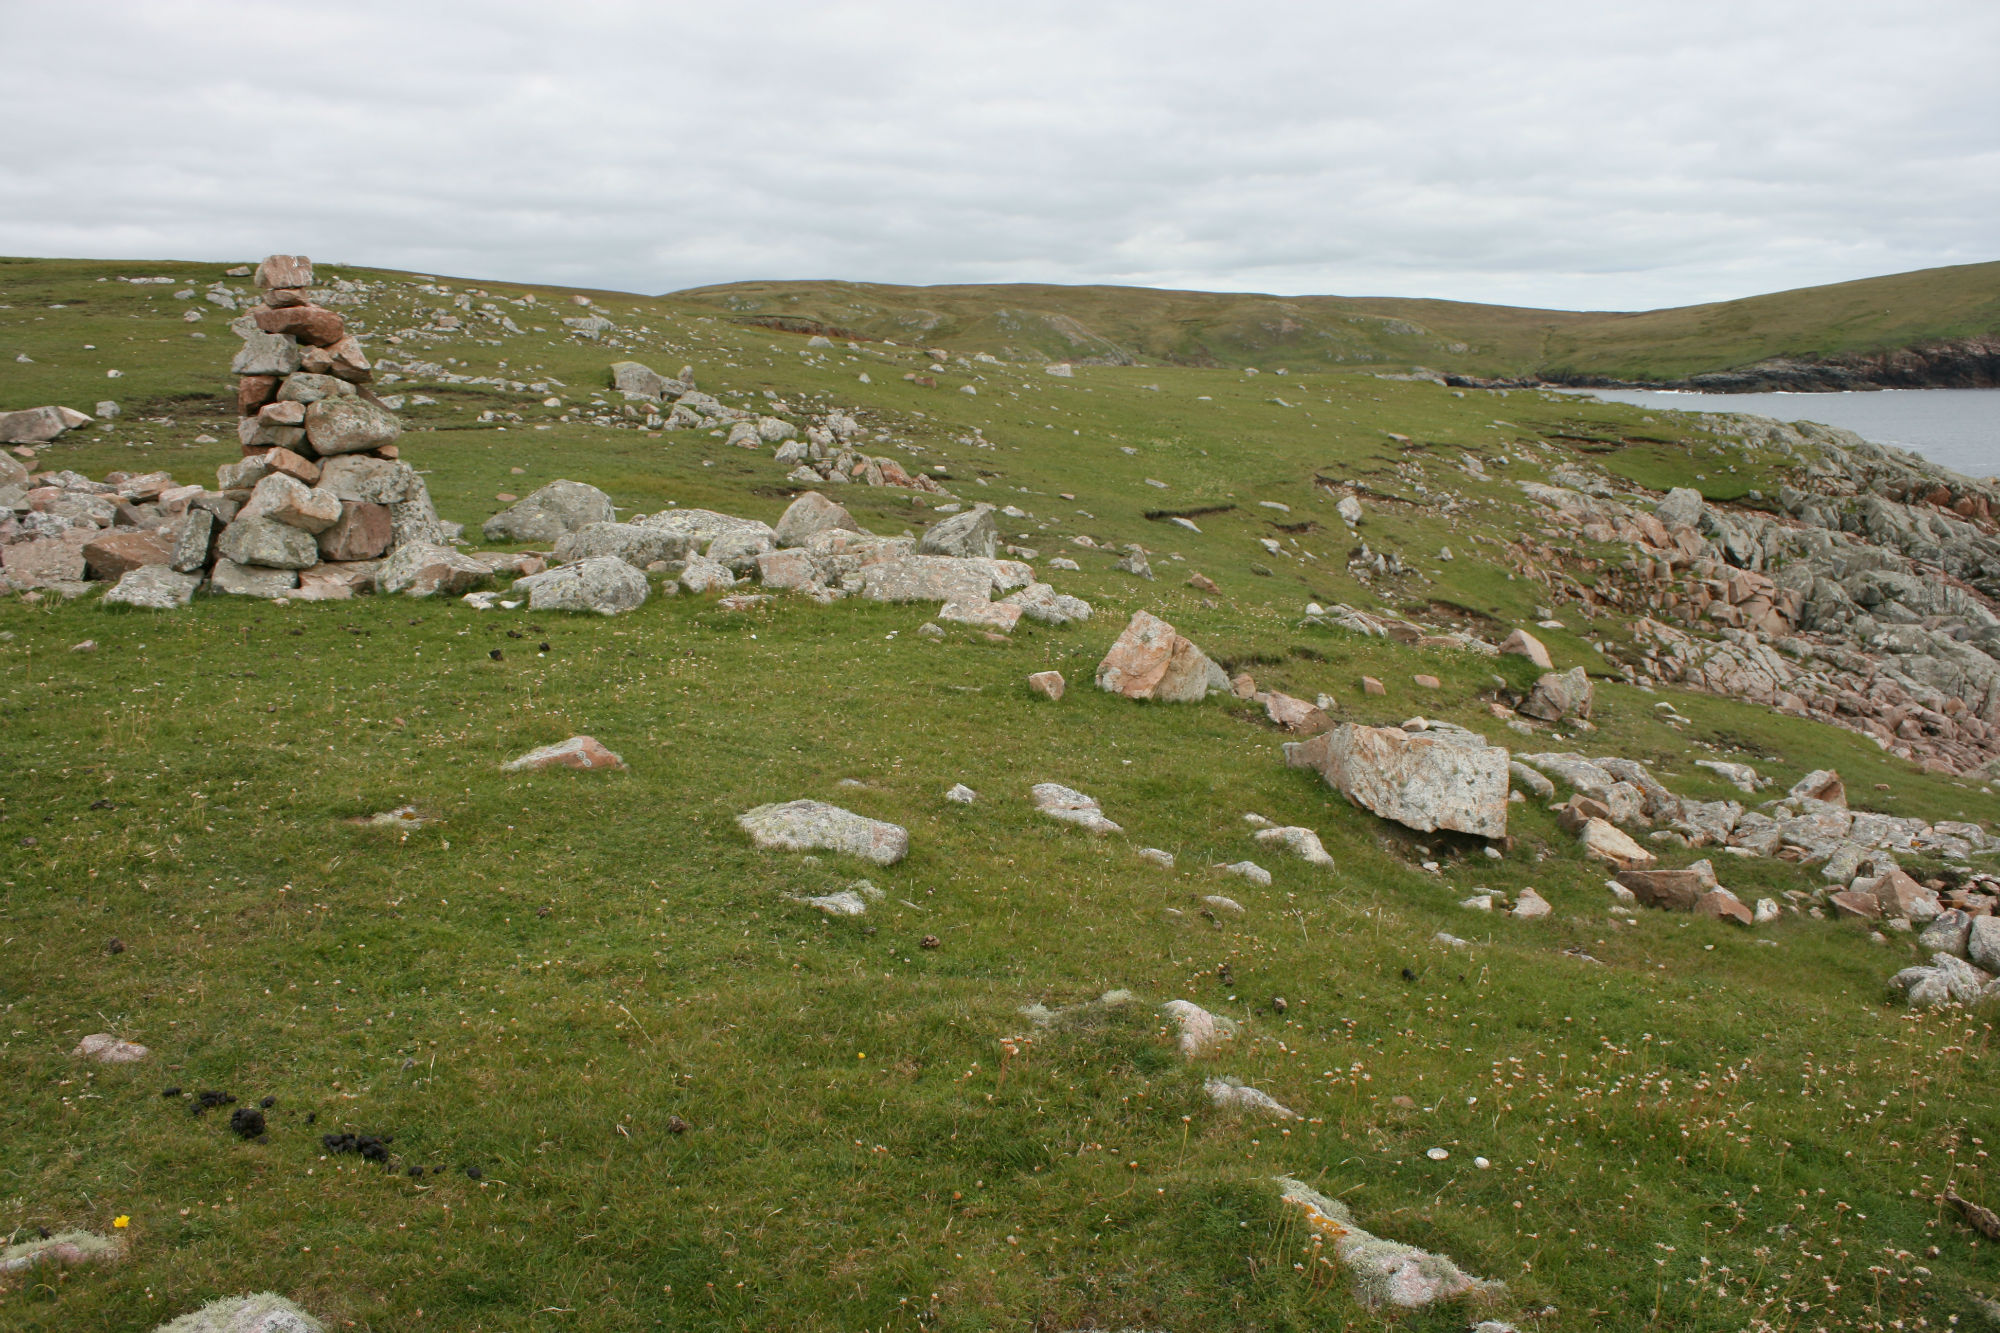 Swinsi Taing showing the site in relation to the coast edge